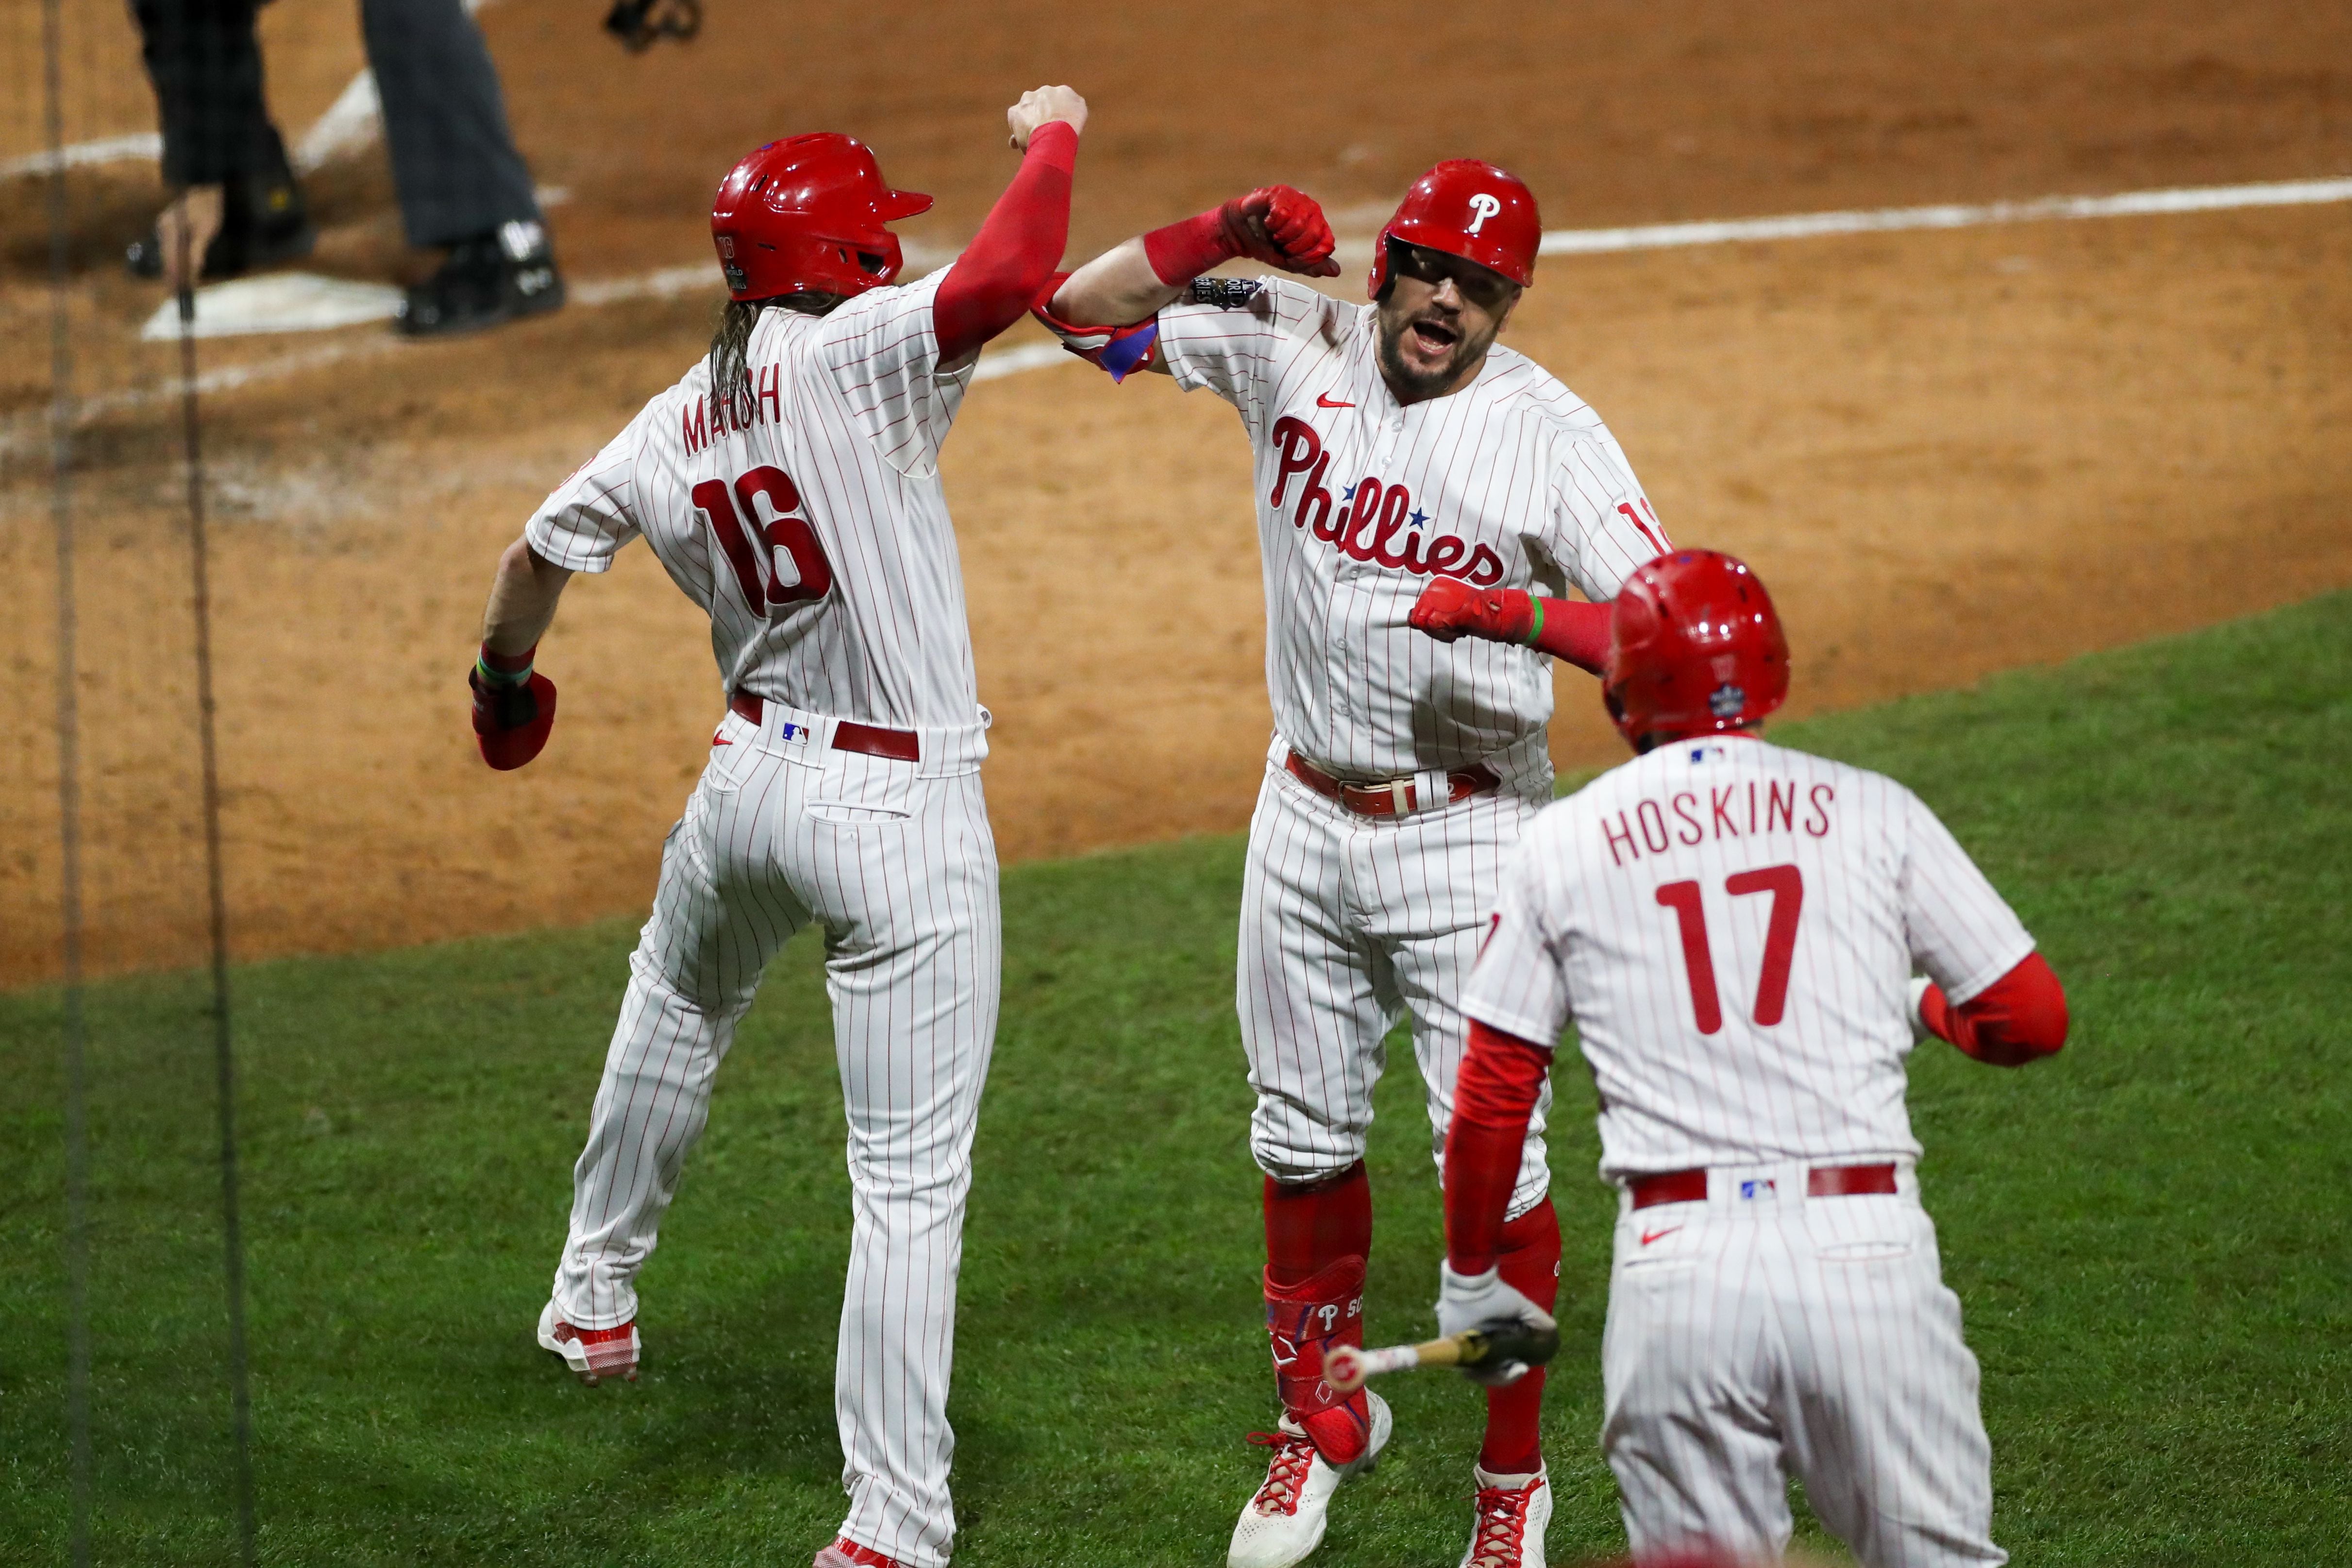 Ranger Suárez exits early, Phillies blown out in fifth straight loss   Phillies Nation - Your source for Philadelphia Phillies news, opinion,  history, rumors, events, and other fun stuff.